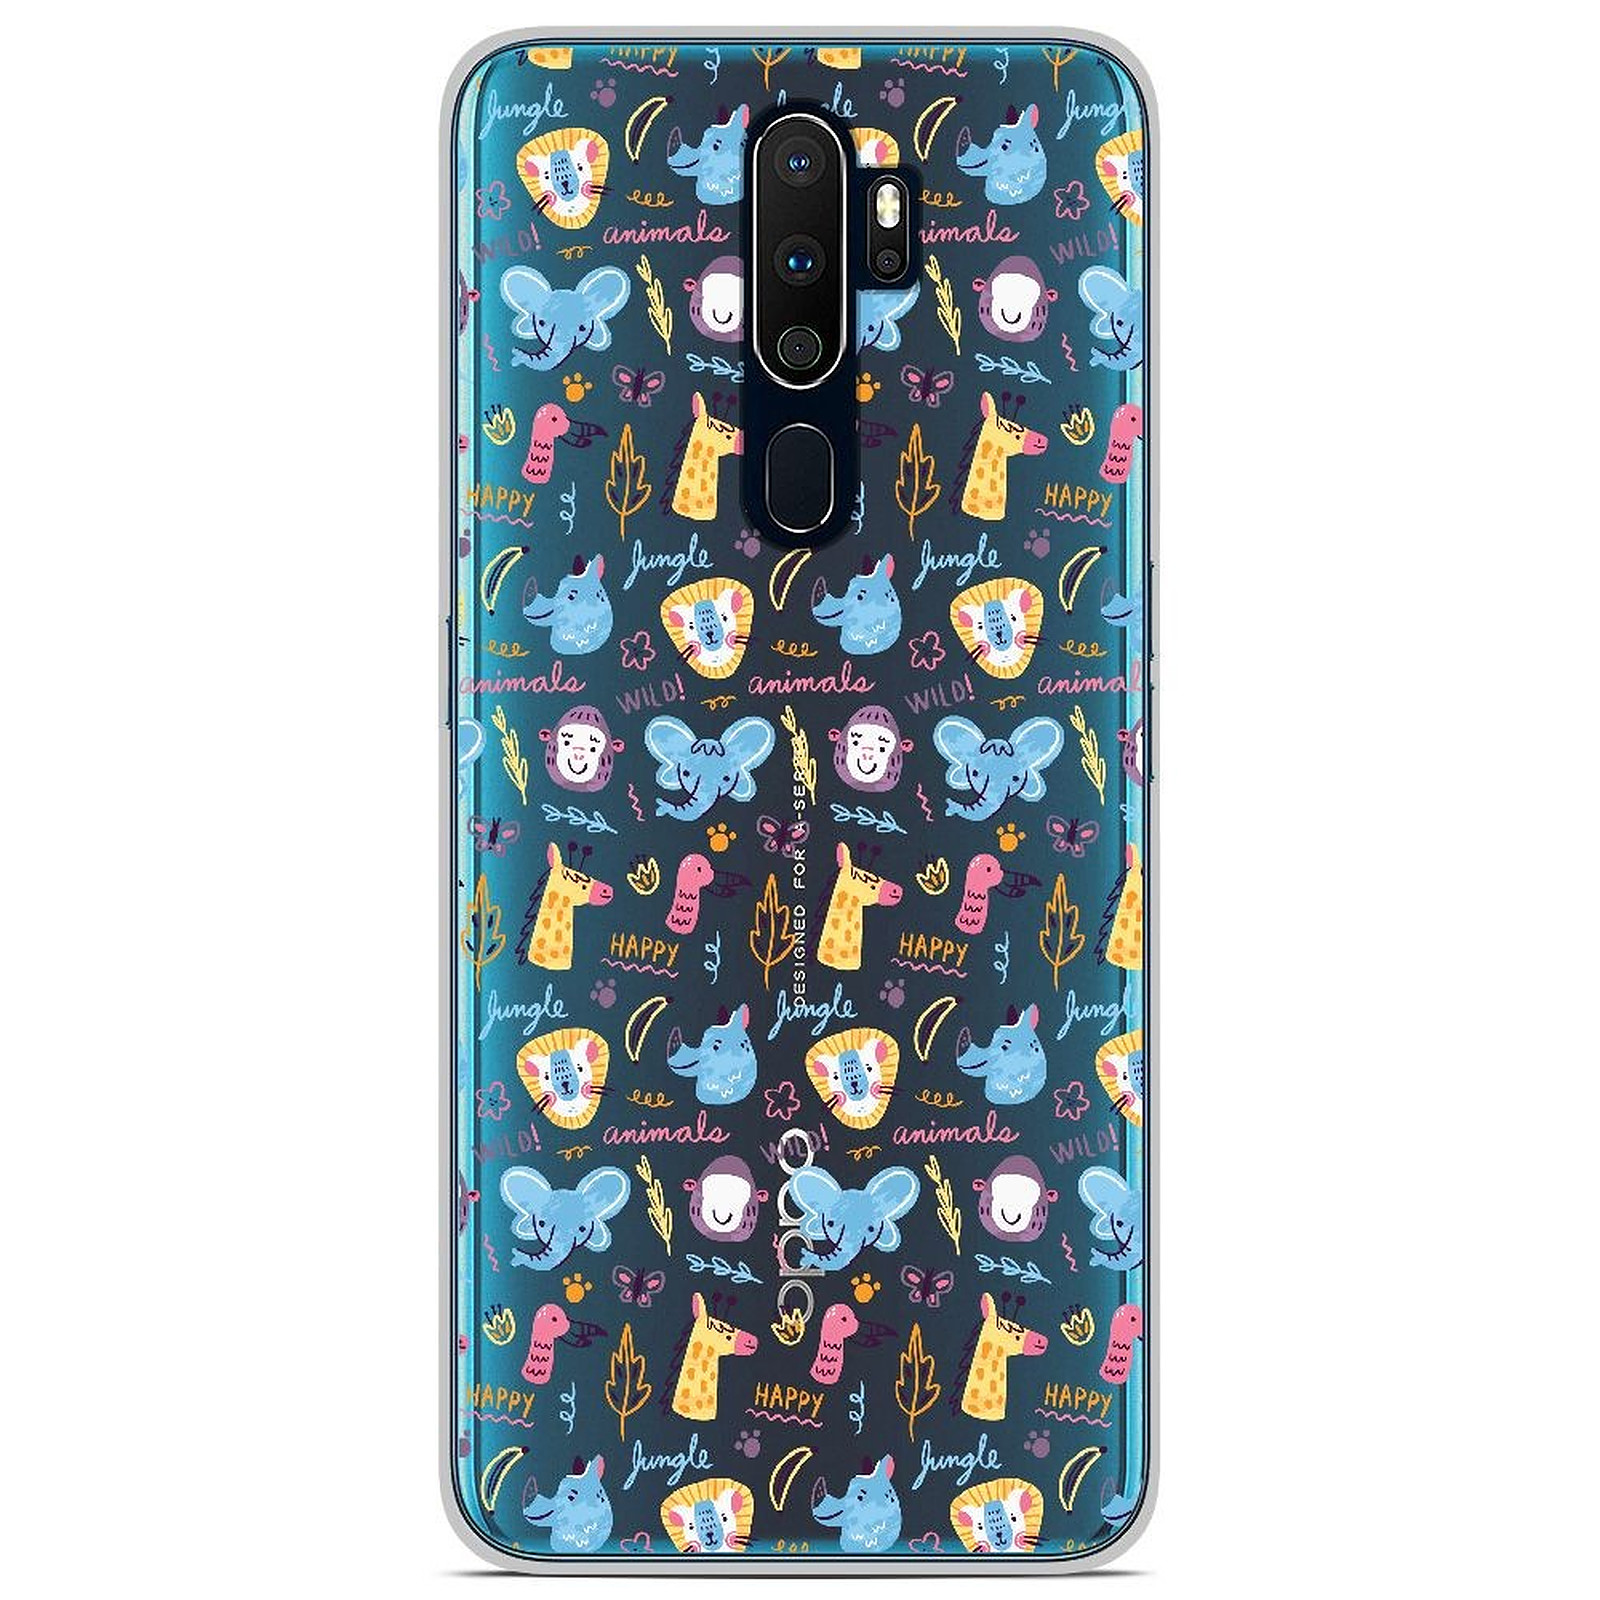 1001 Coques Coque silicone gel Oppo A9 2020 motif Happy animals - Coque telephone 1001Coques